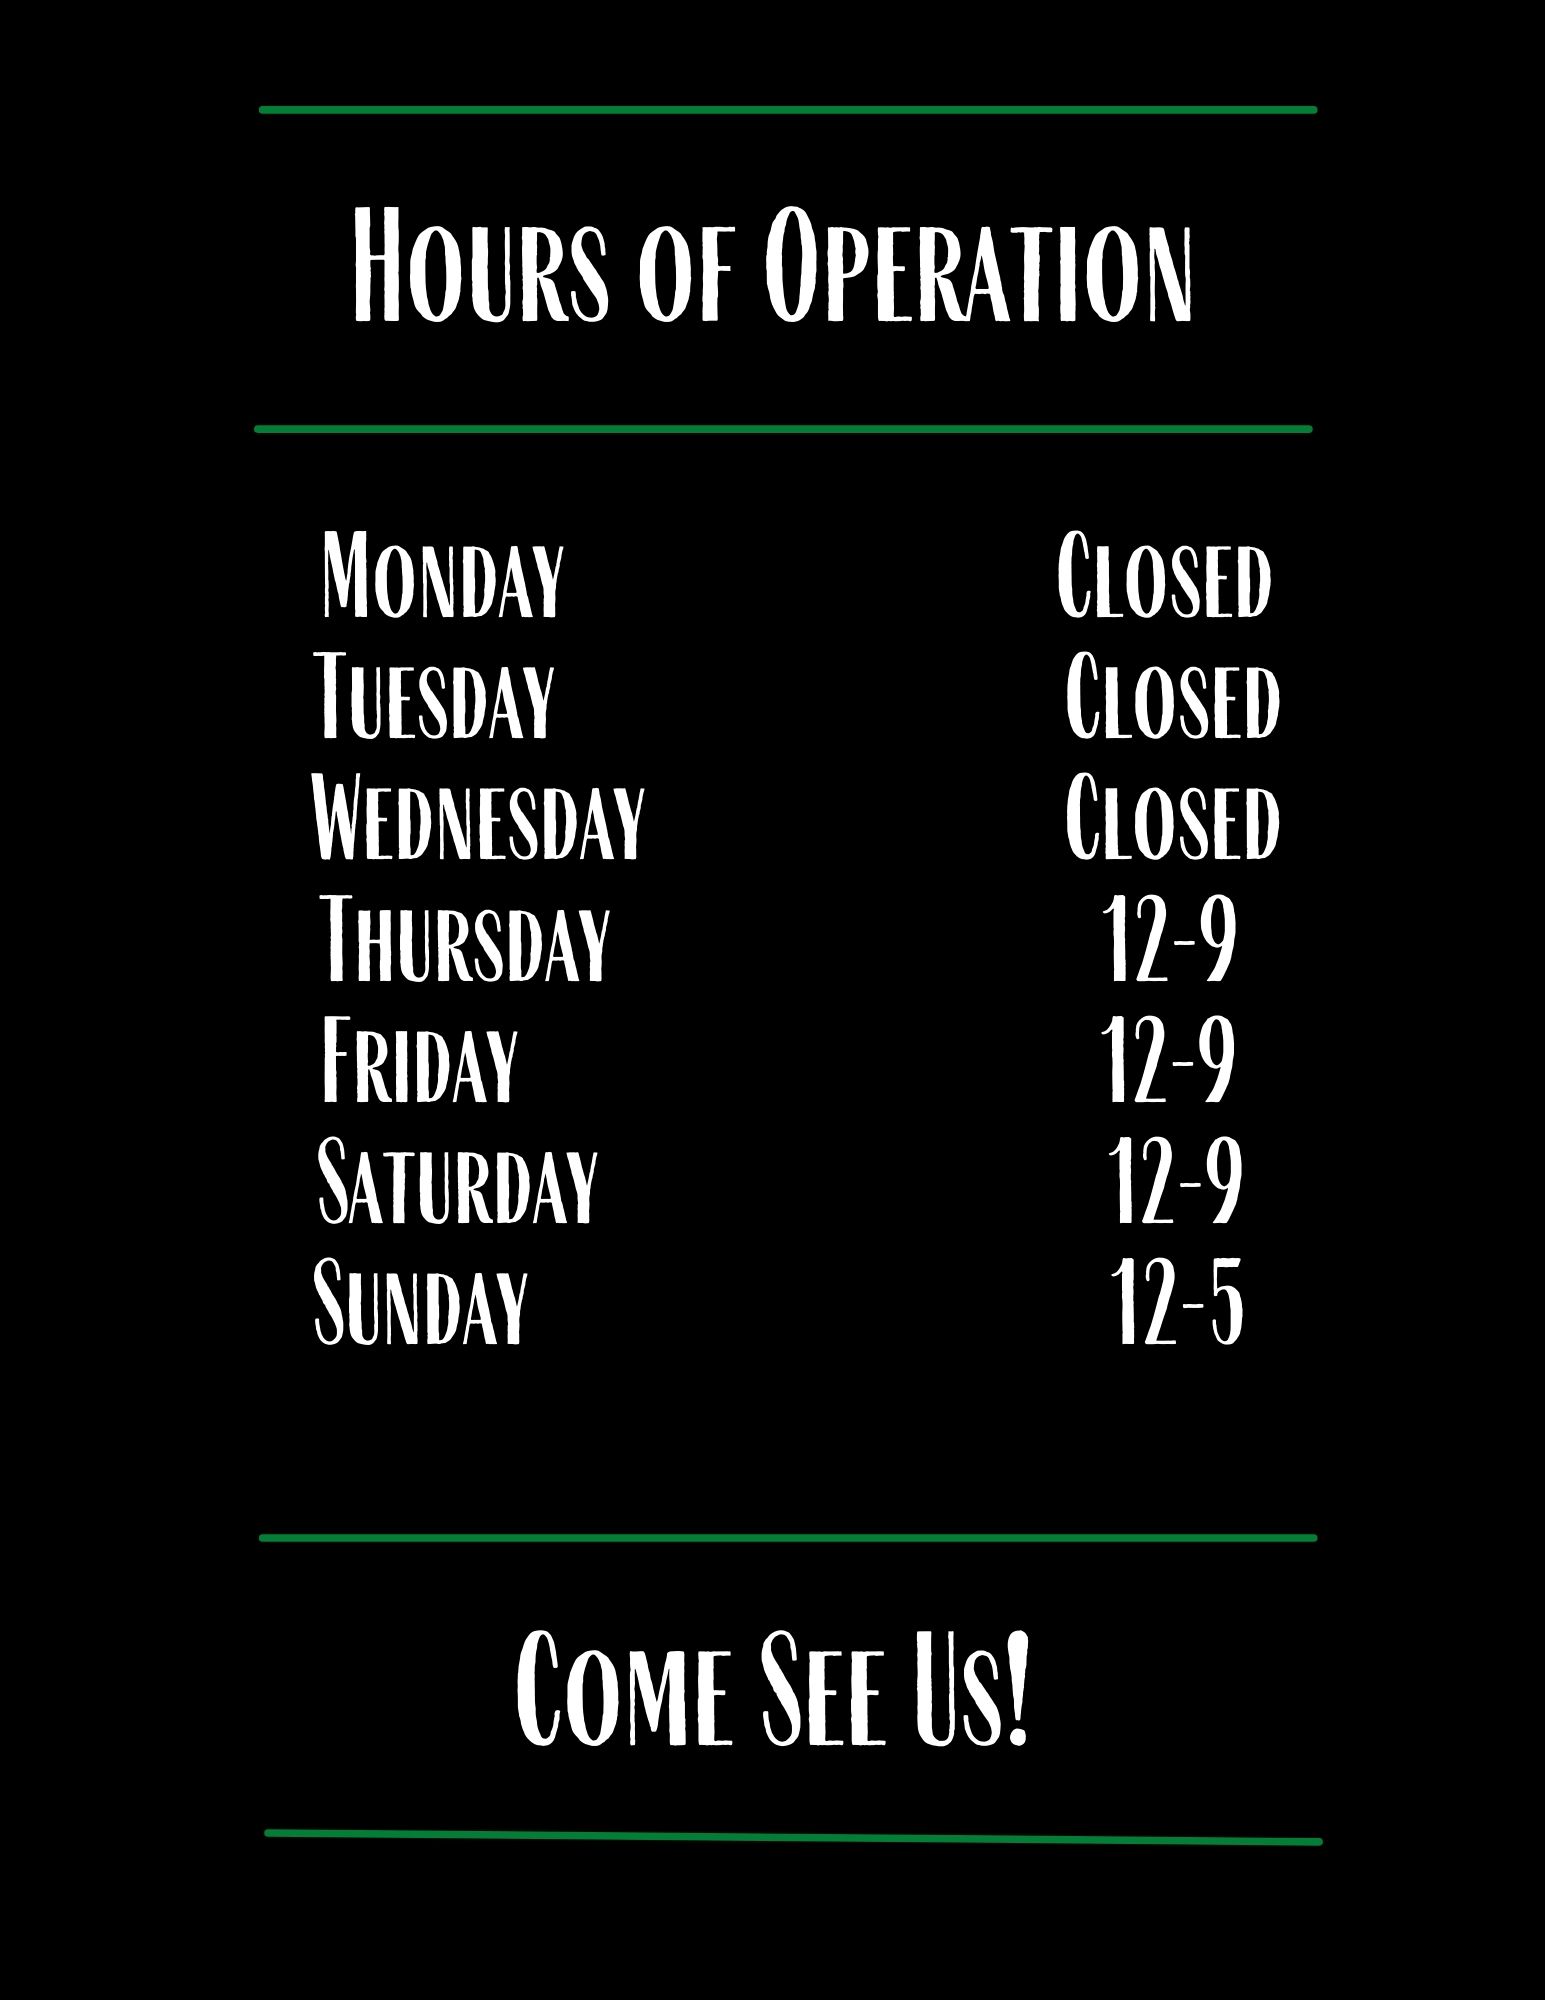 Hours of Operation 8x10